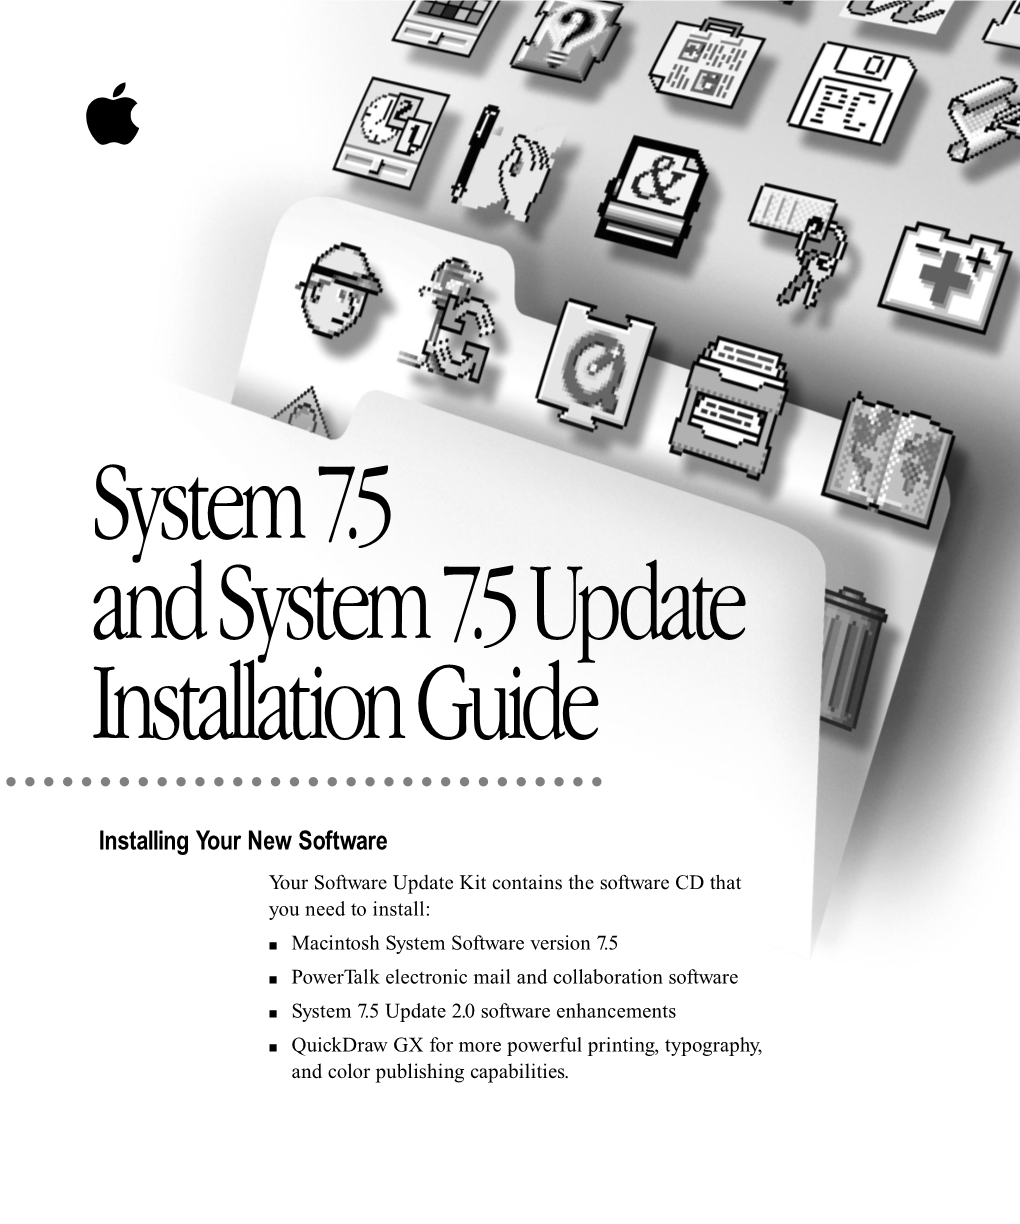 System 7.5 and System 7.5 Update Installation Guide